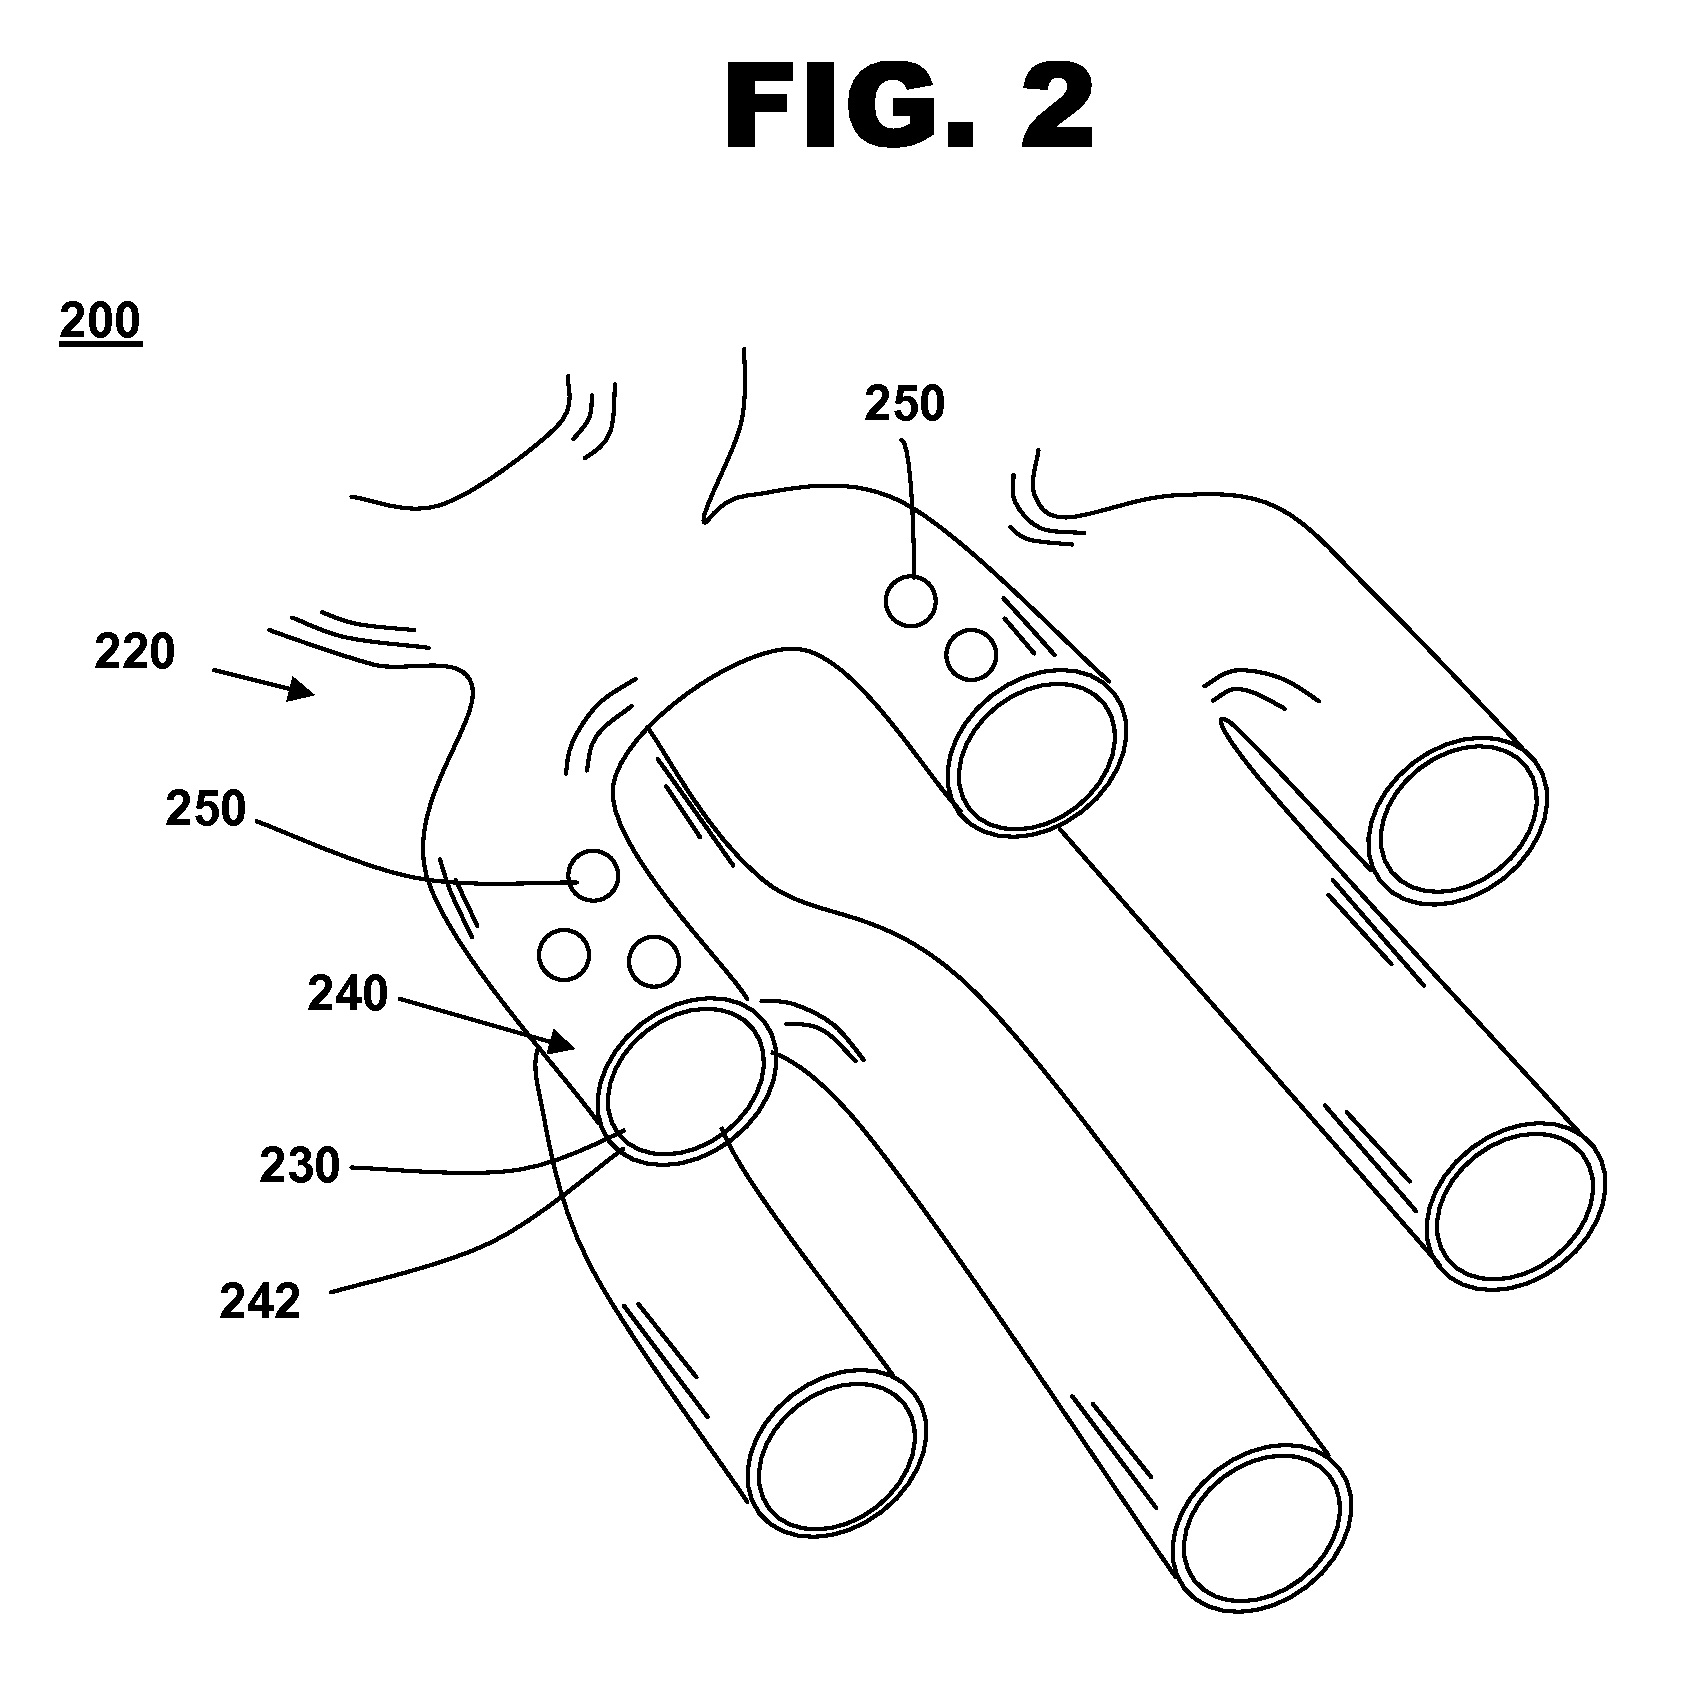 Implantable device with reservoirs for increased drug loading